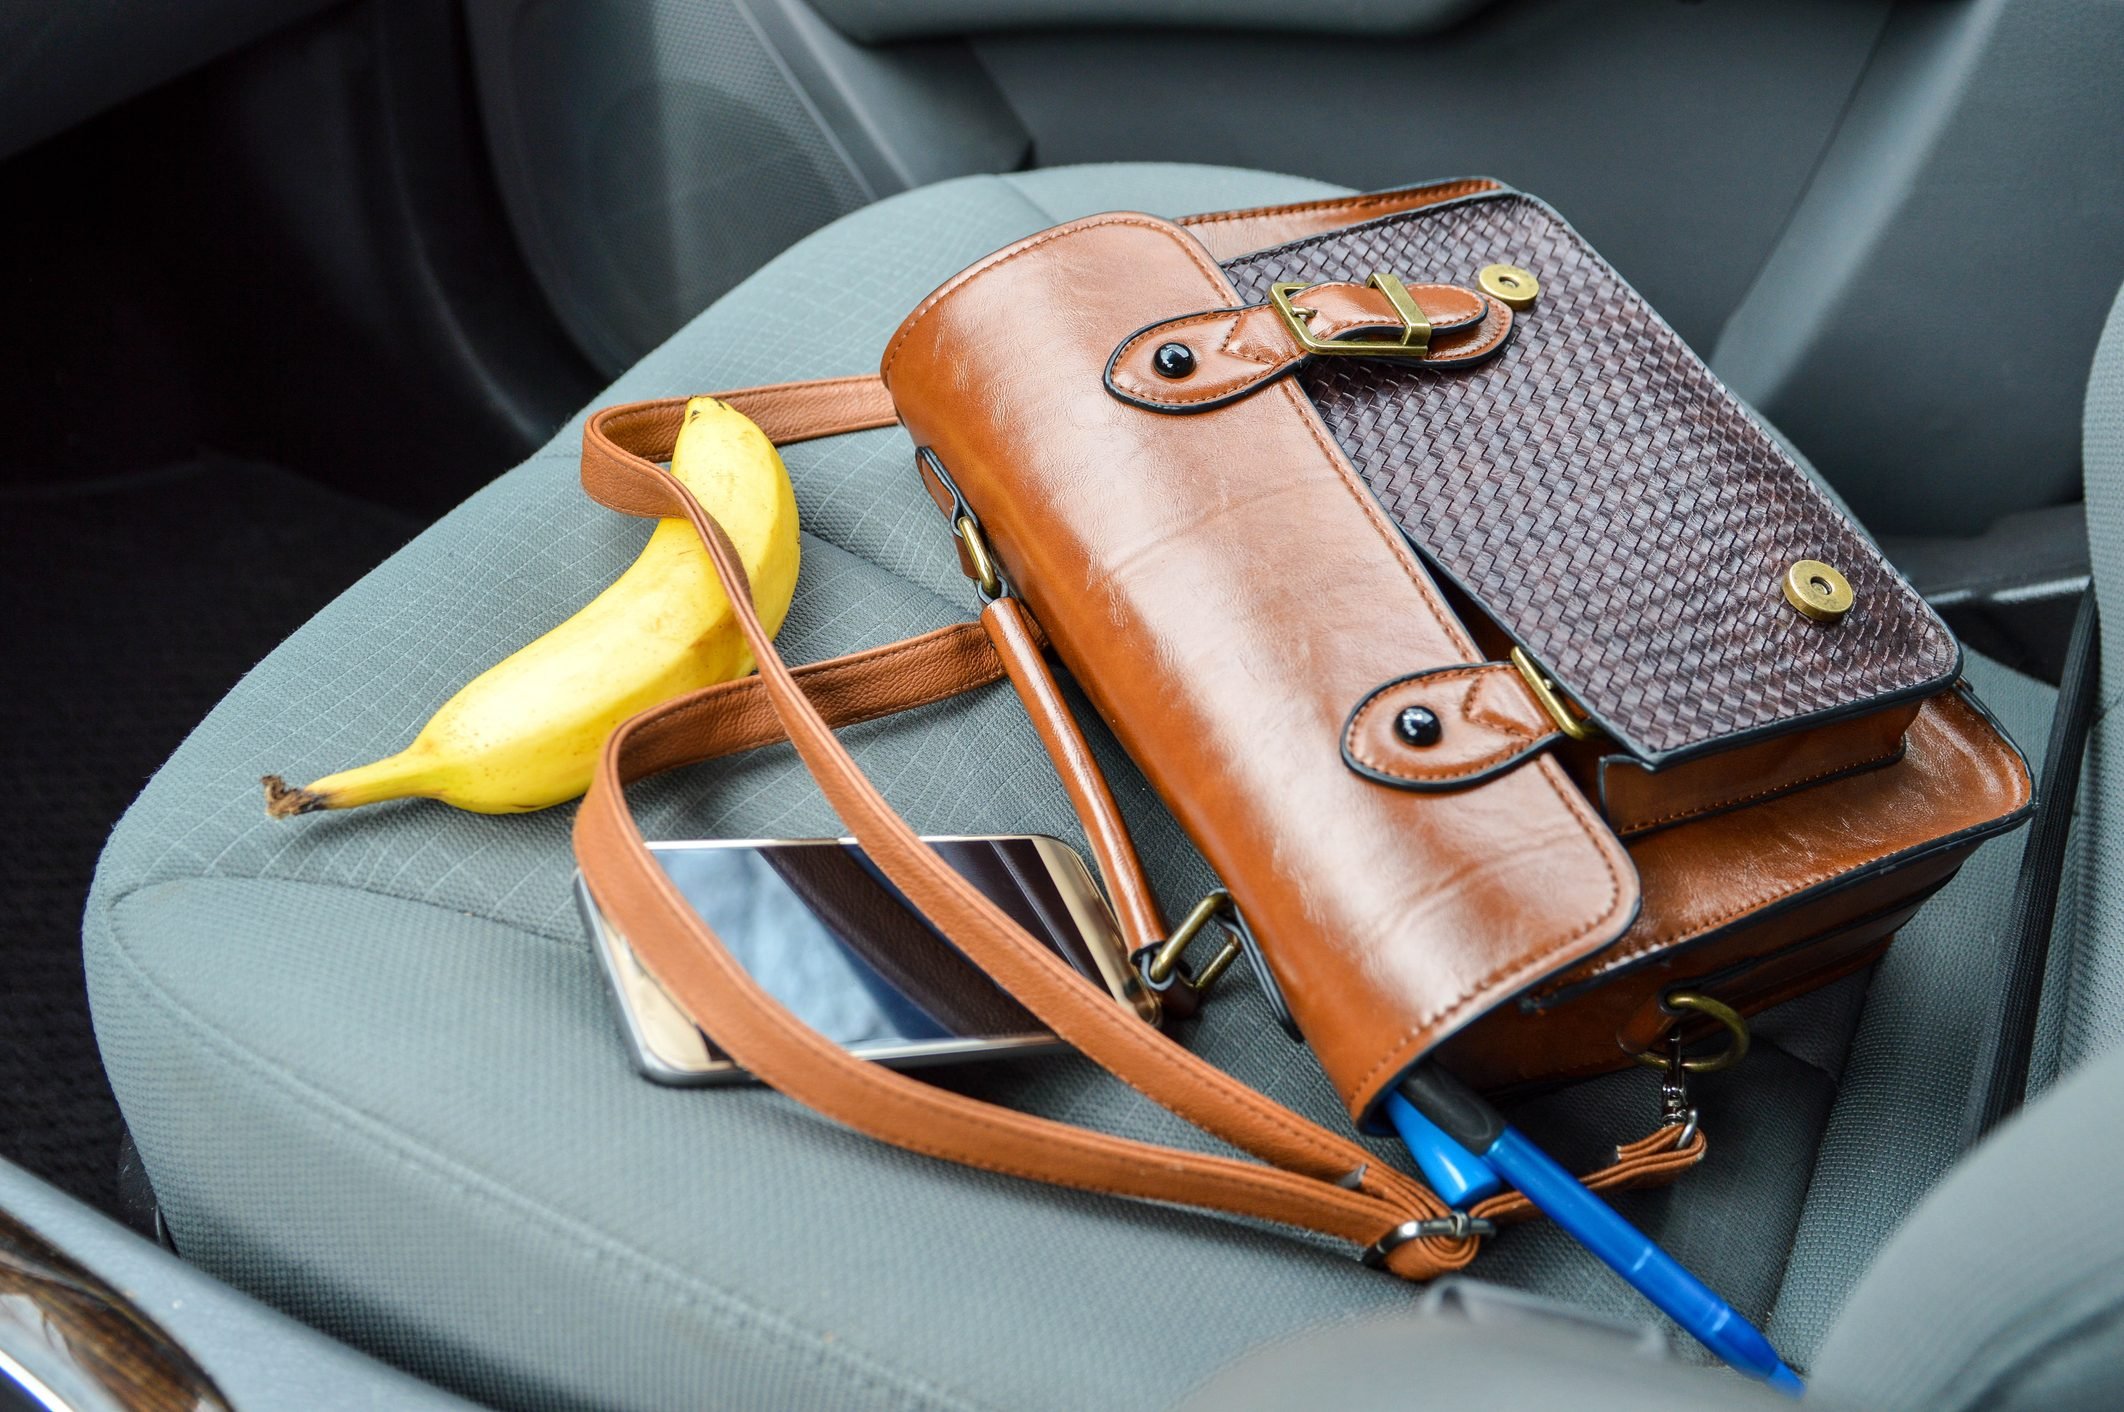 Purse and Accessories Laid Out on Passenger Seat of Car